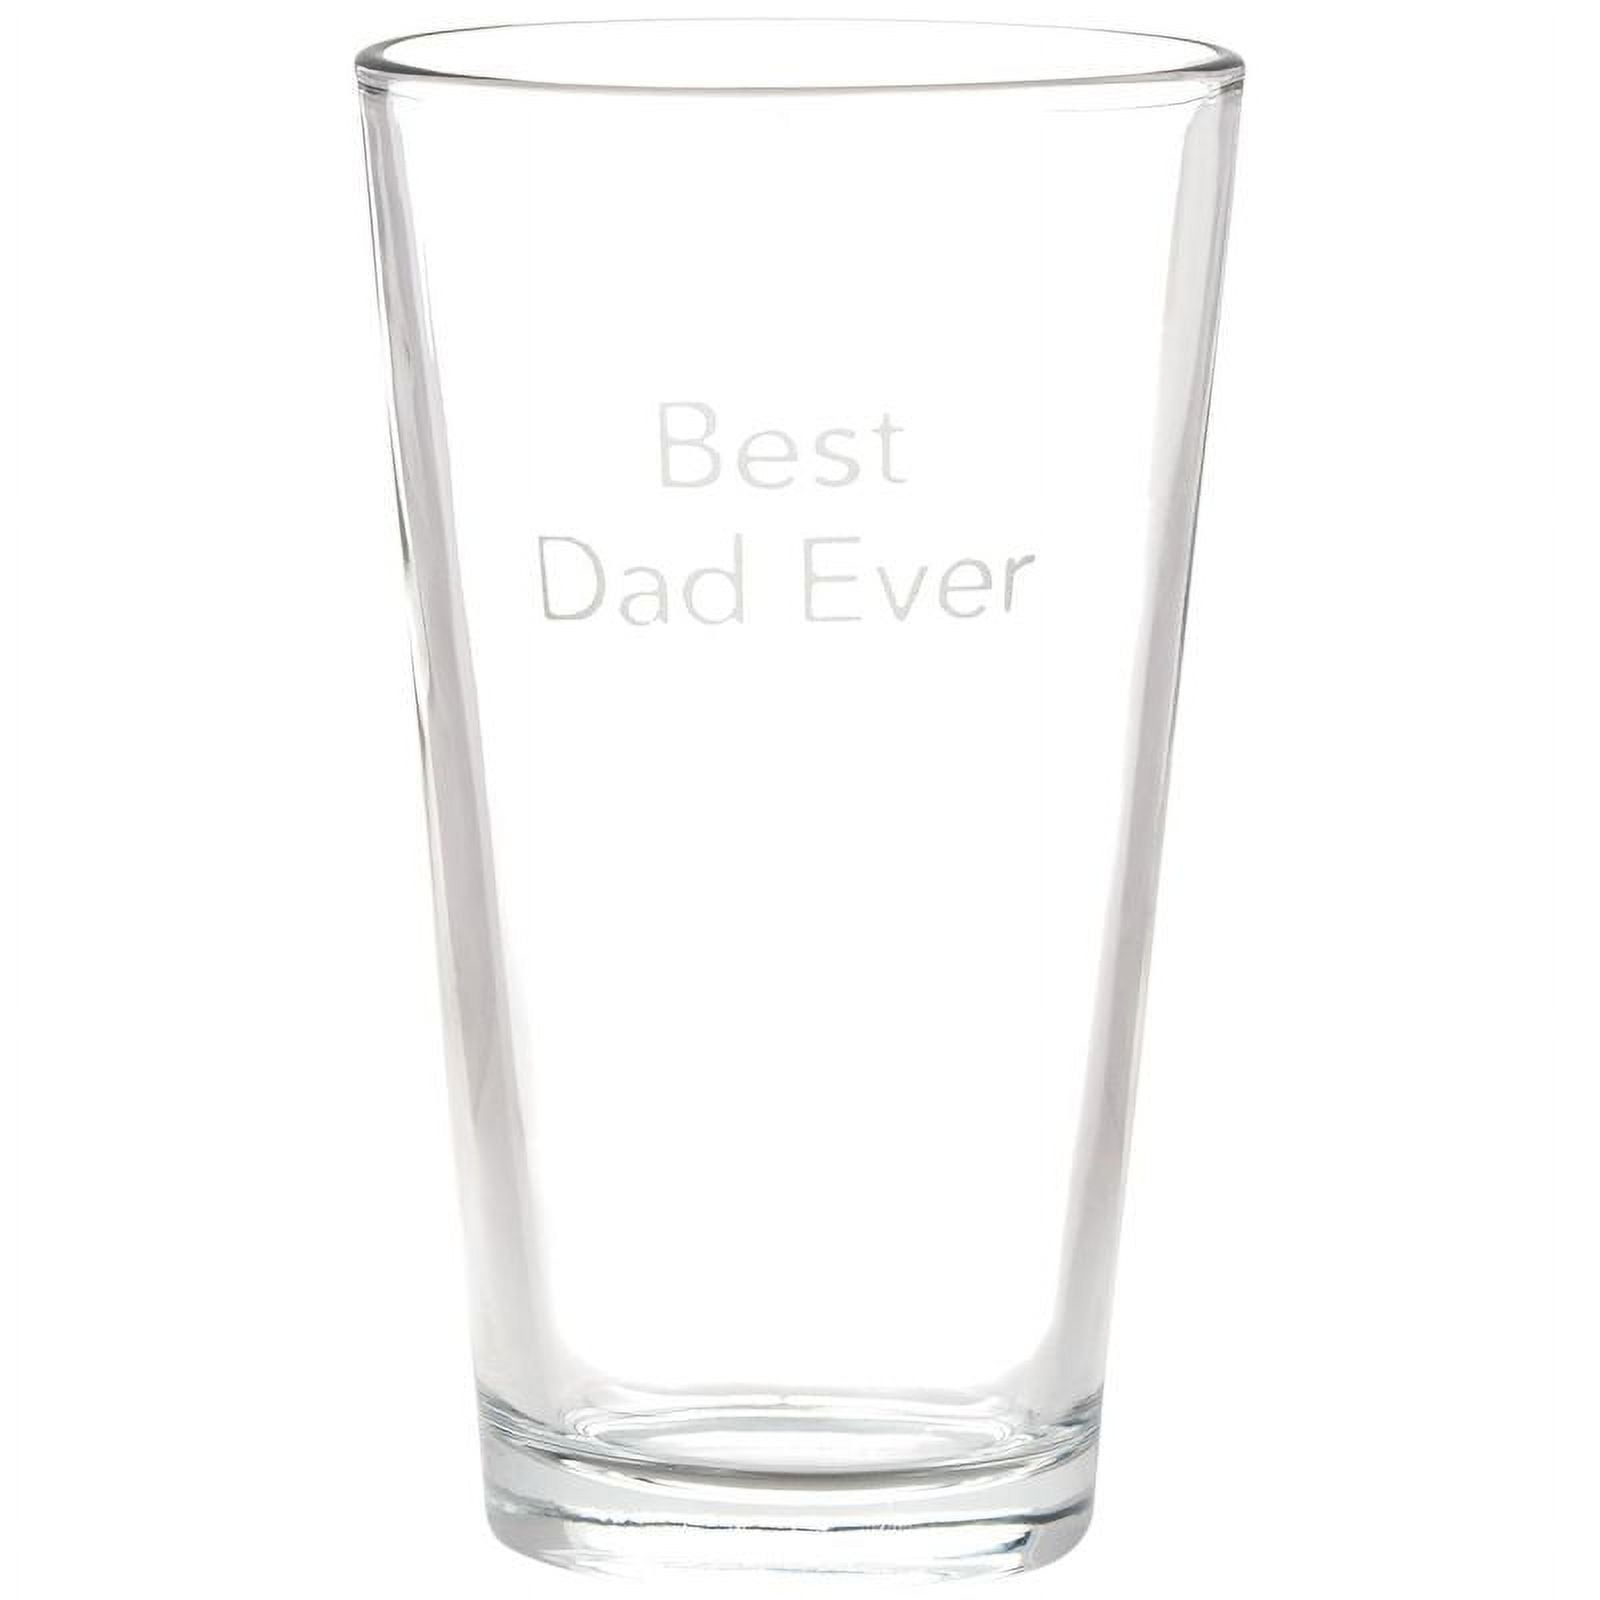 Best Dad' Can-Shaped Glass - OhMyMaker